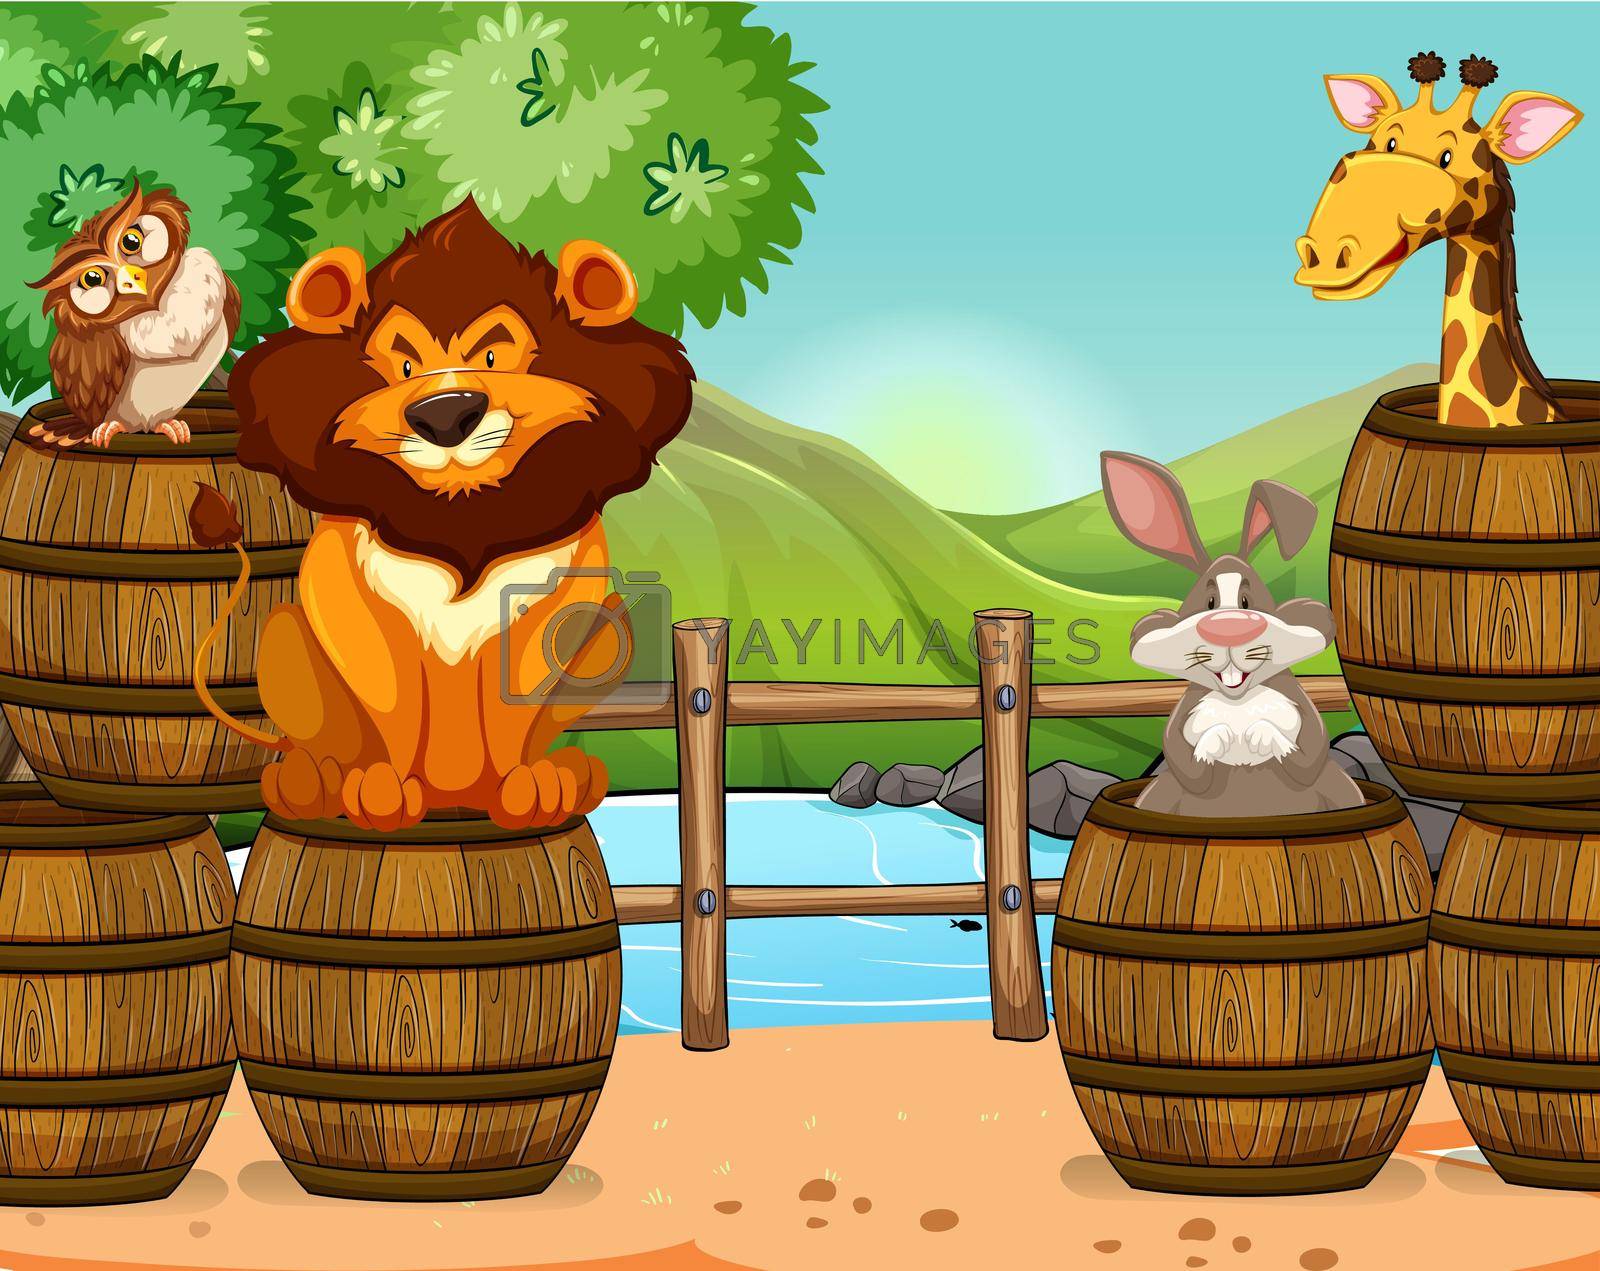 Group of animals inside and on the barrels